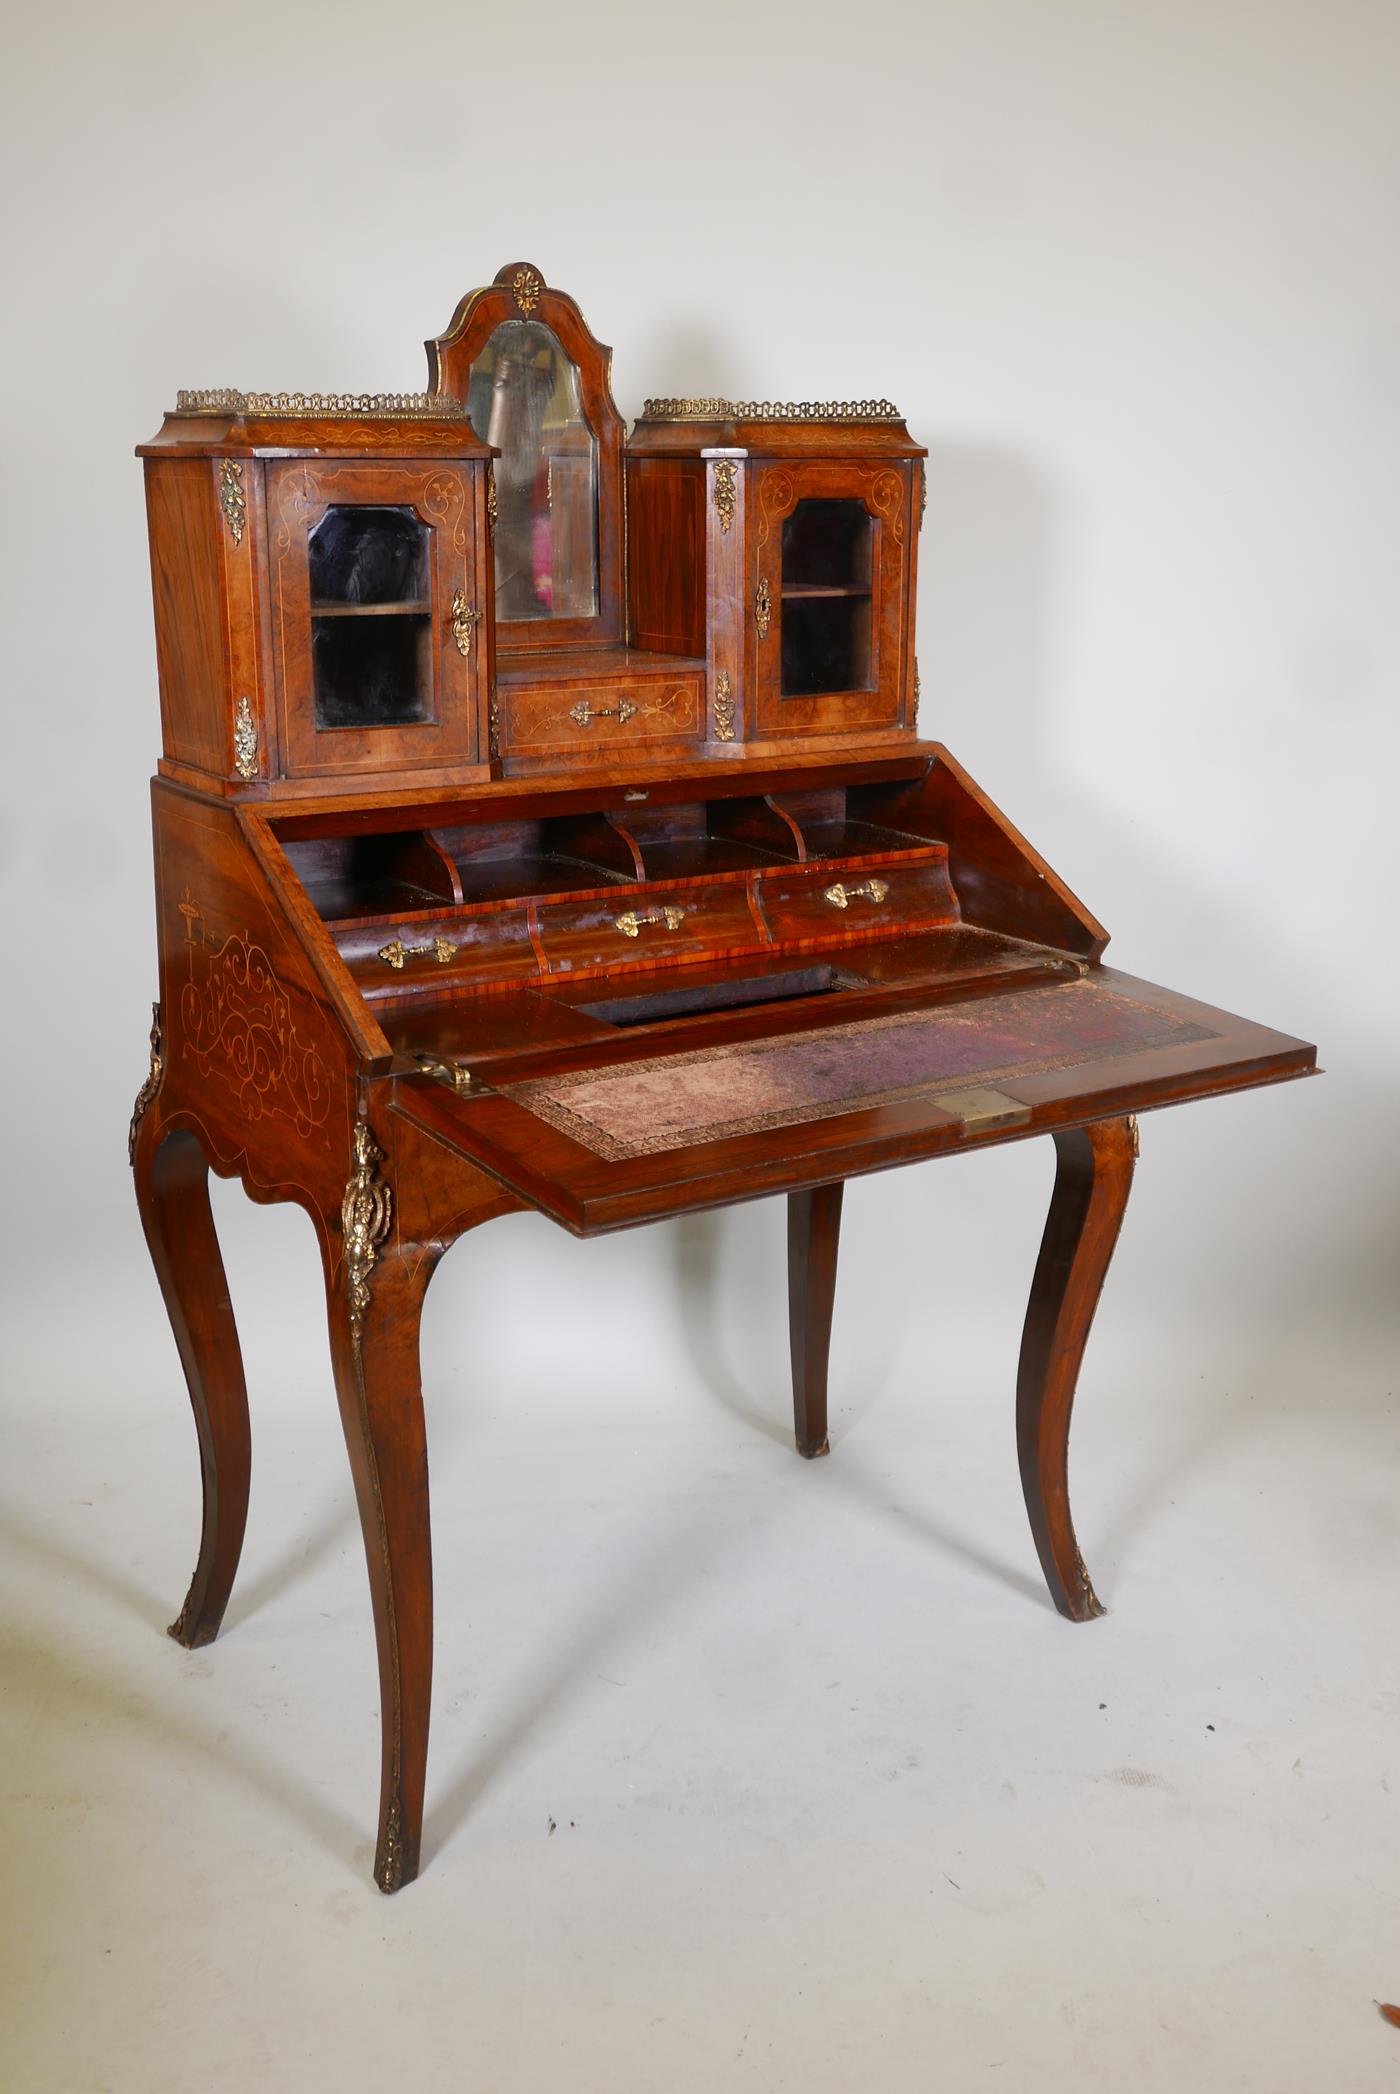 A Victorian inlaid, figured and burr walnut bonne-heure-de jour, with a brass galleried top and - Image 3 of 7